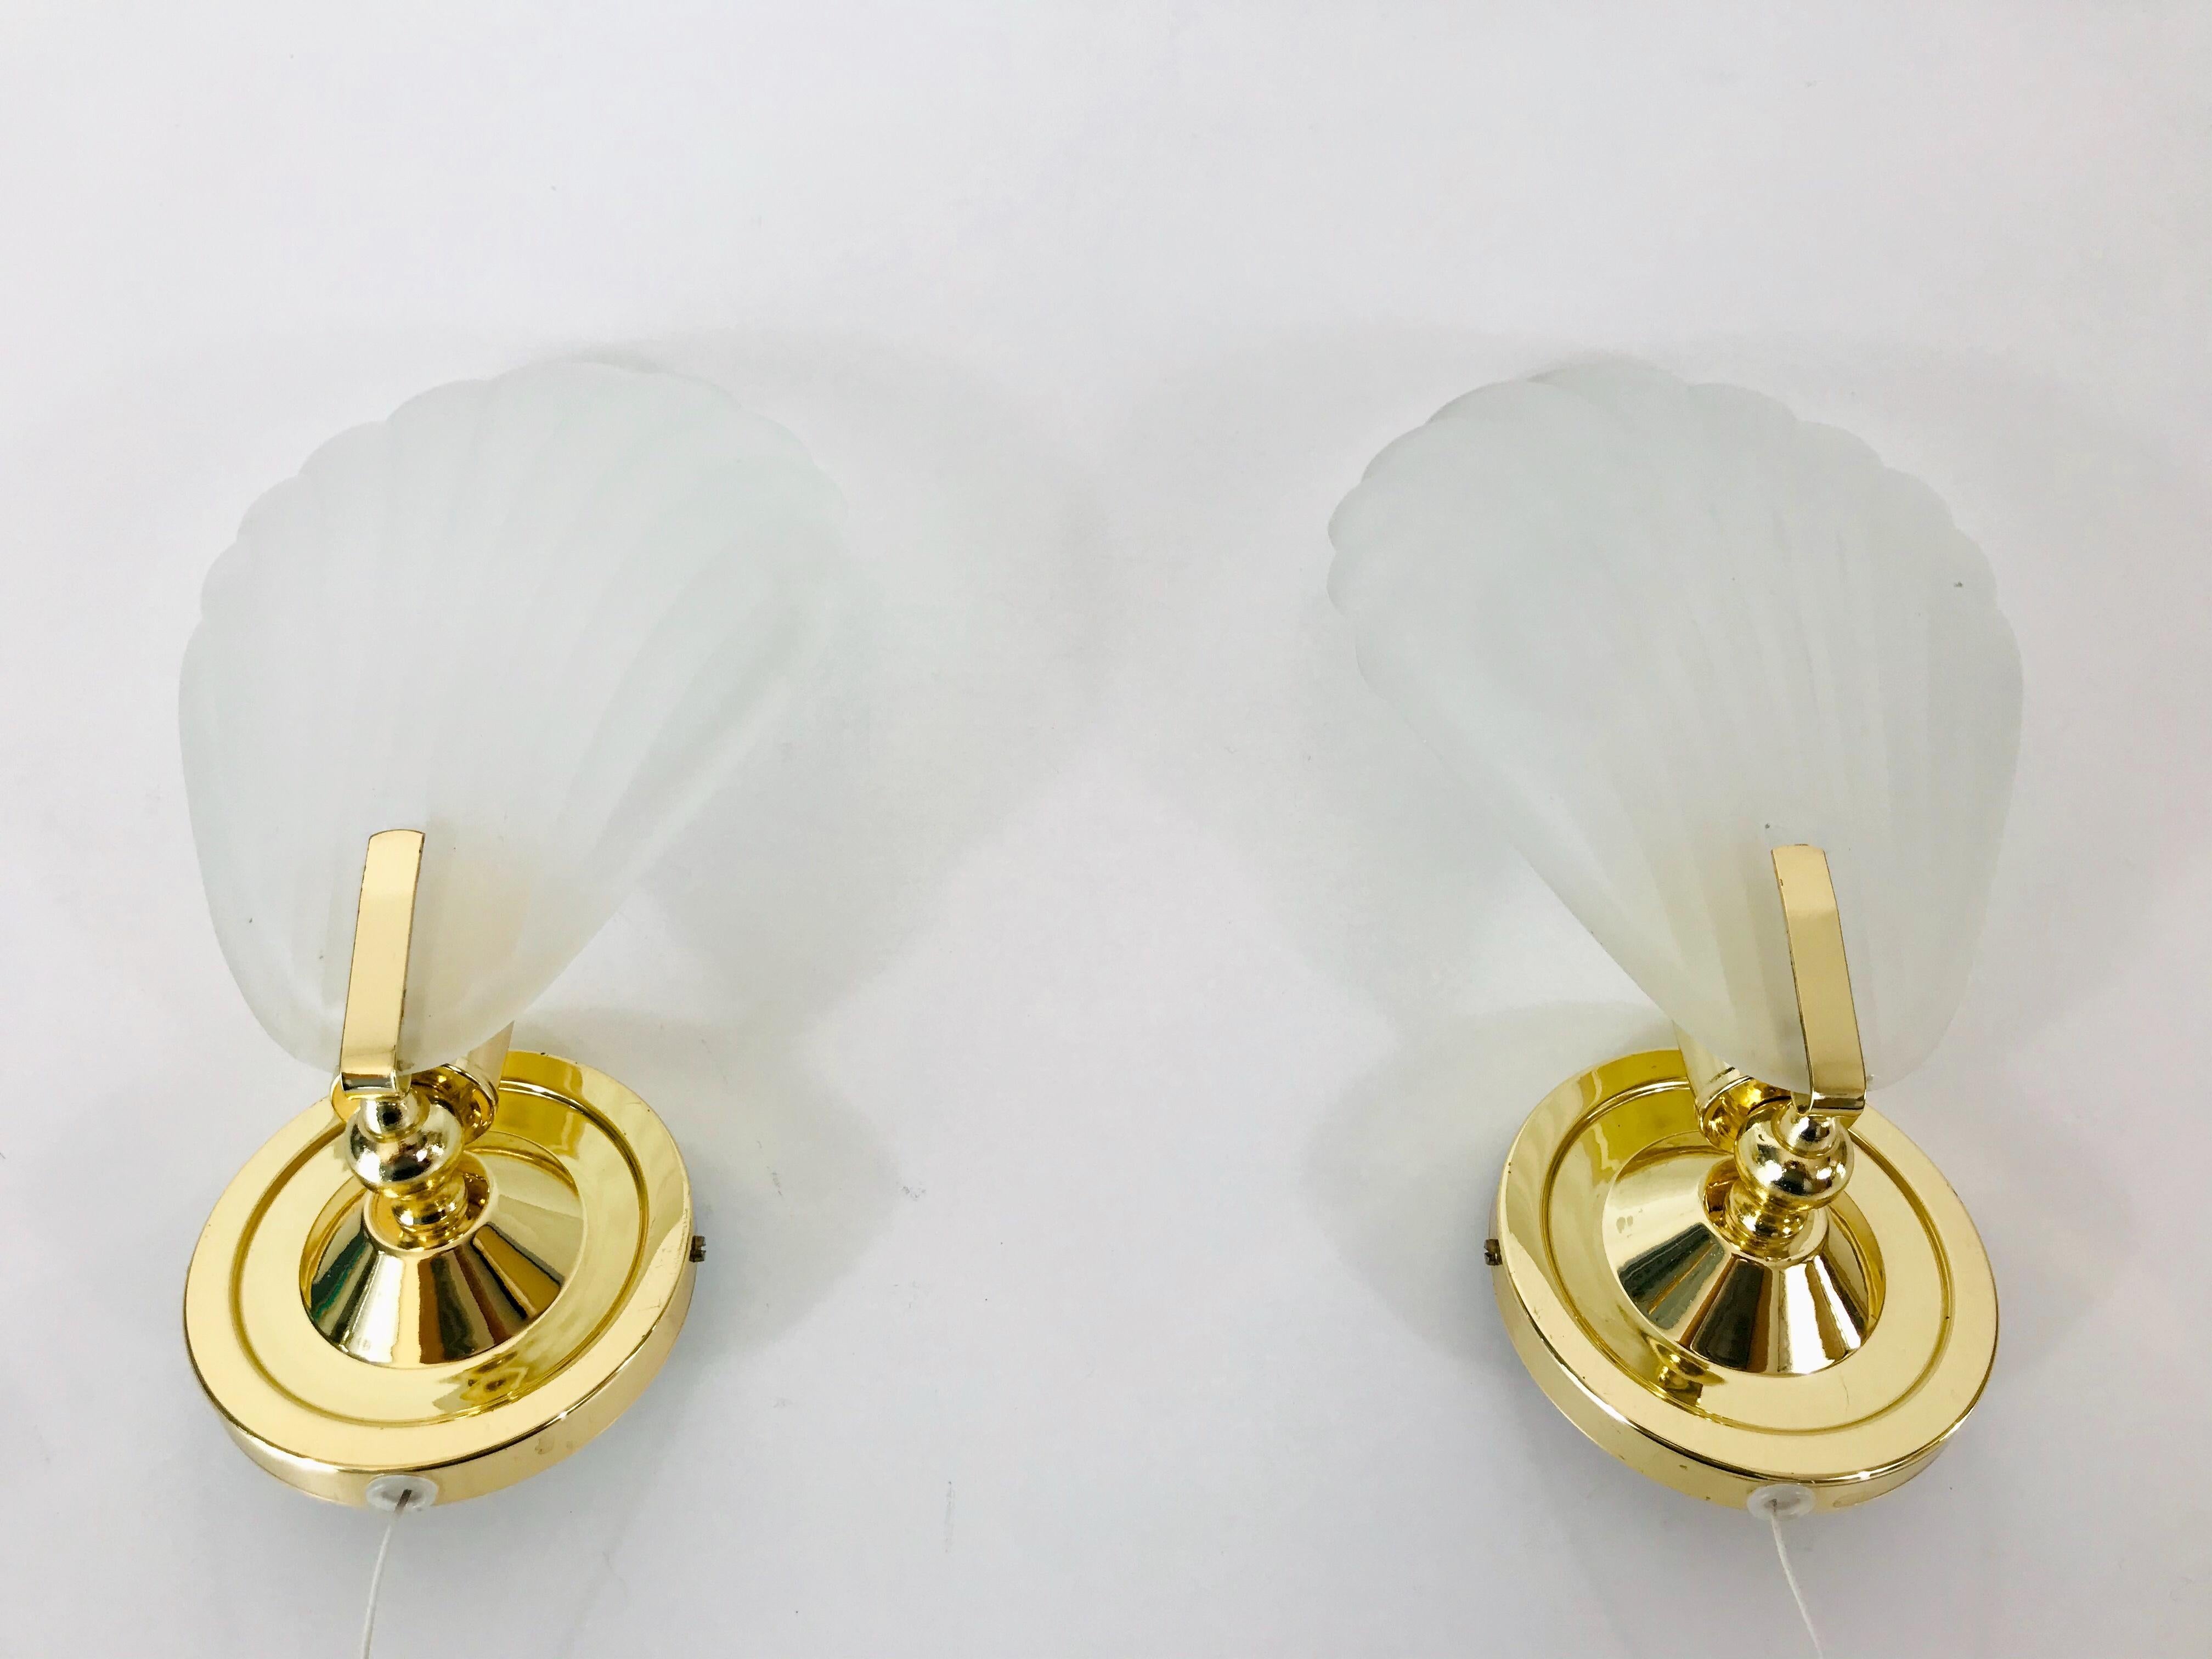 A beautiful pair of table lamps made in Italy in the 1980s. They have a shell shape and are made of ice glass. Very good vintage condition.

The light requires one E14 light bulb.

Free worldwide standard shipping. Express shipping on request.